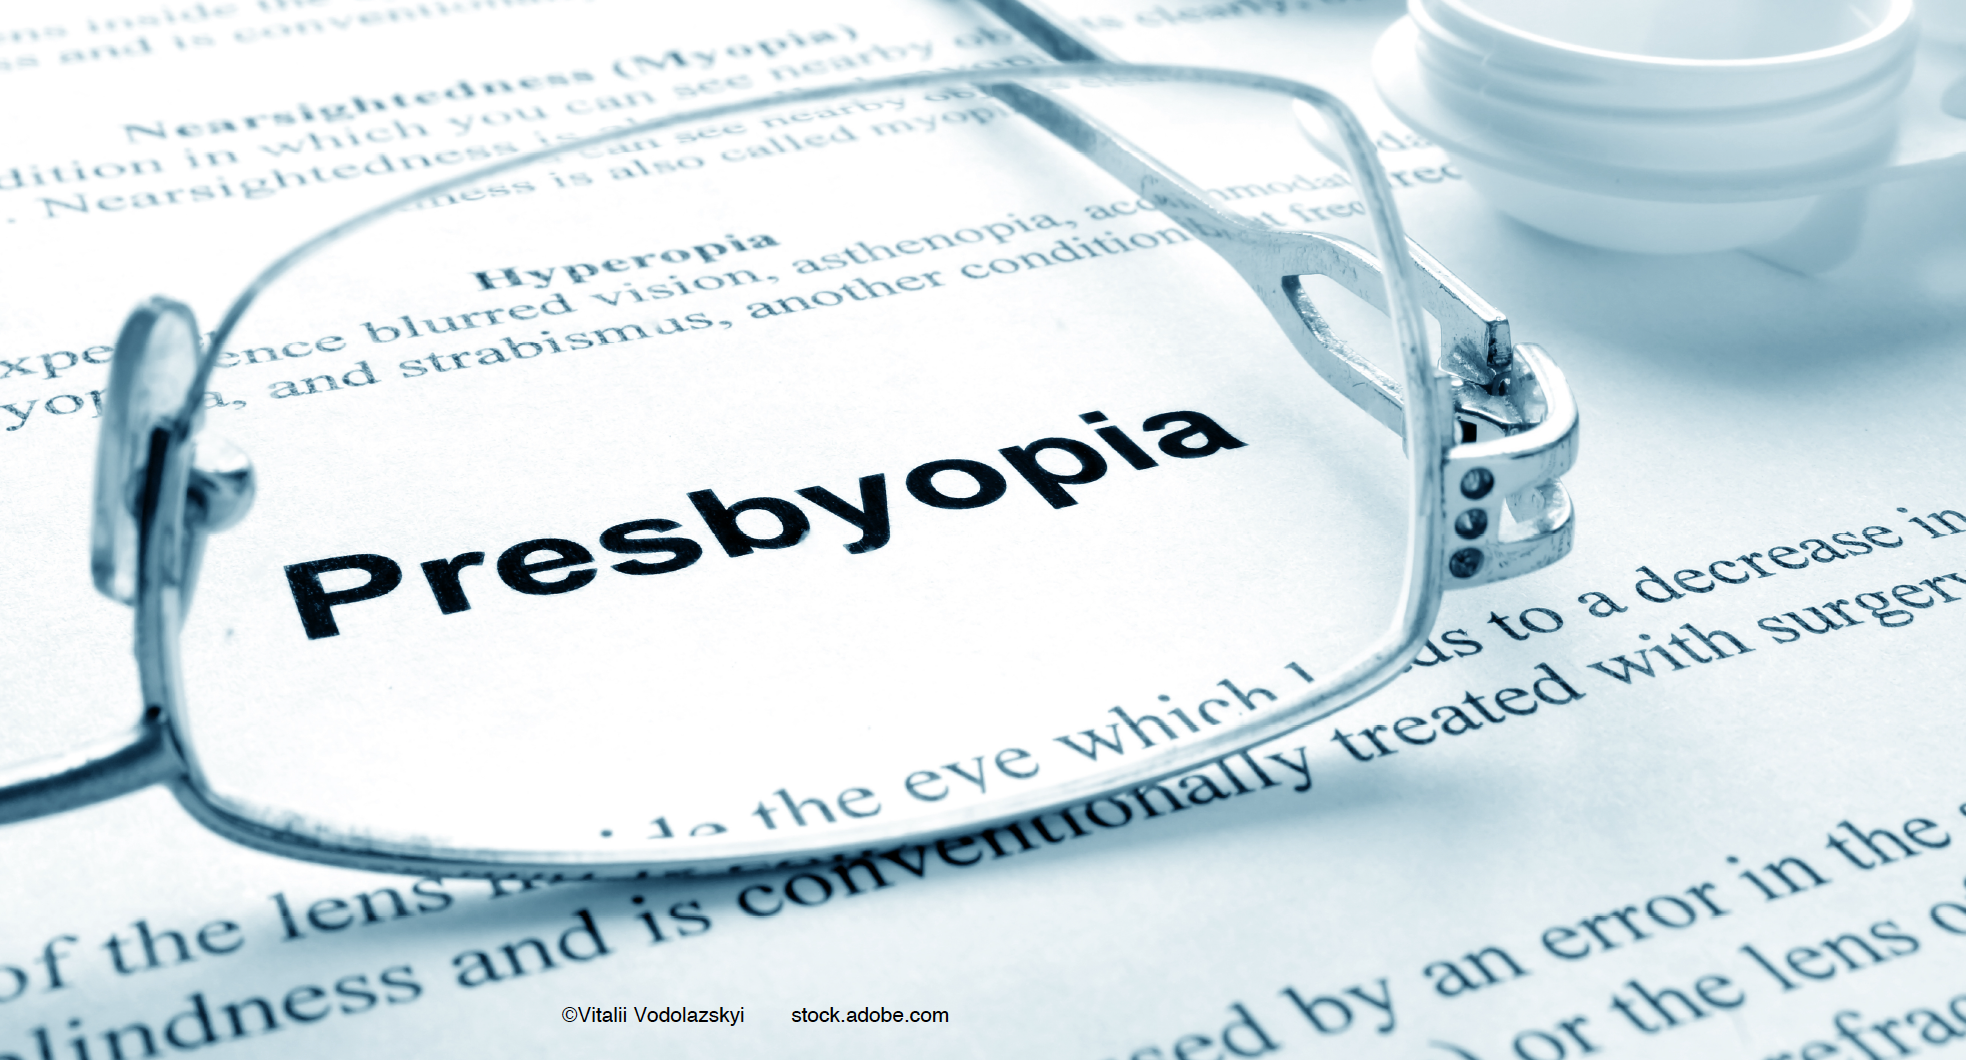 Presbyopia-correcting drops represent a whole new product category